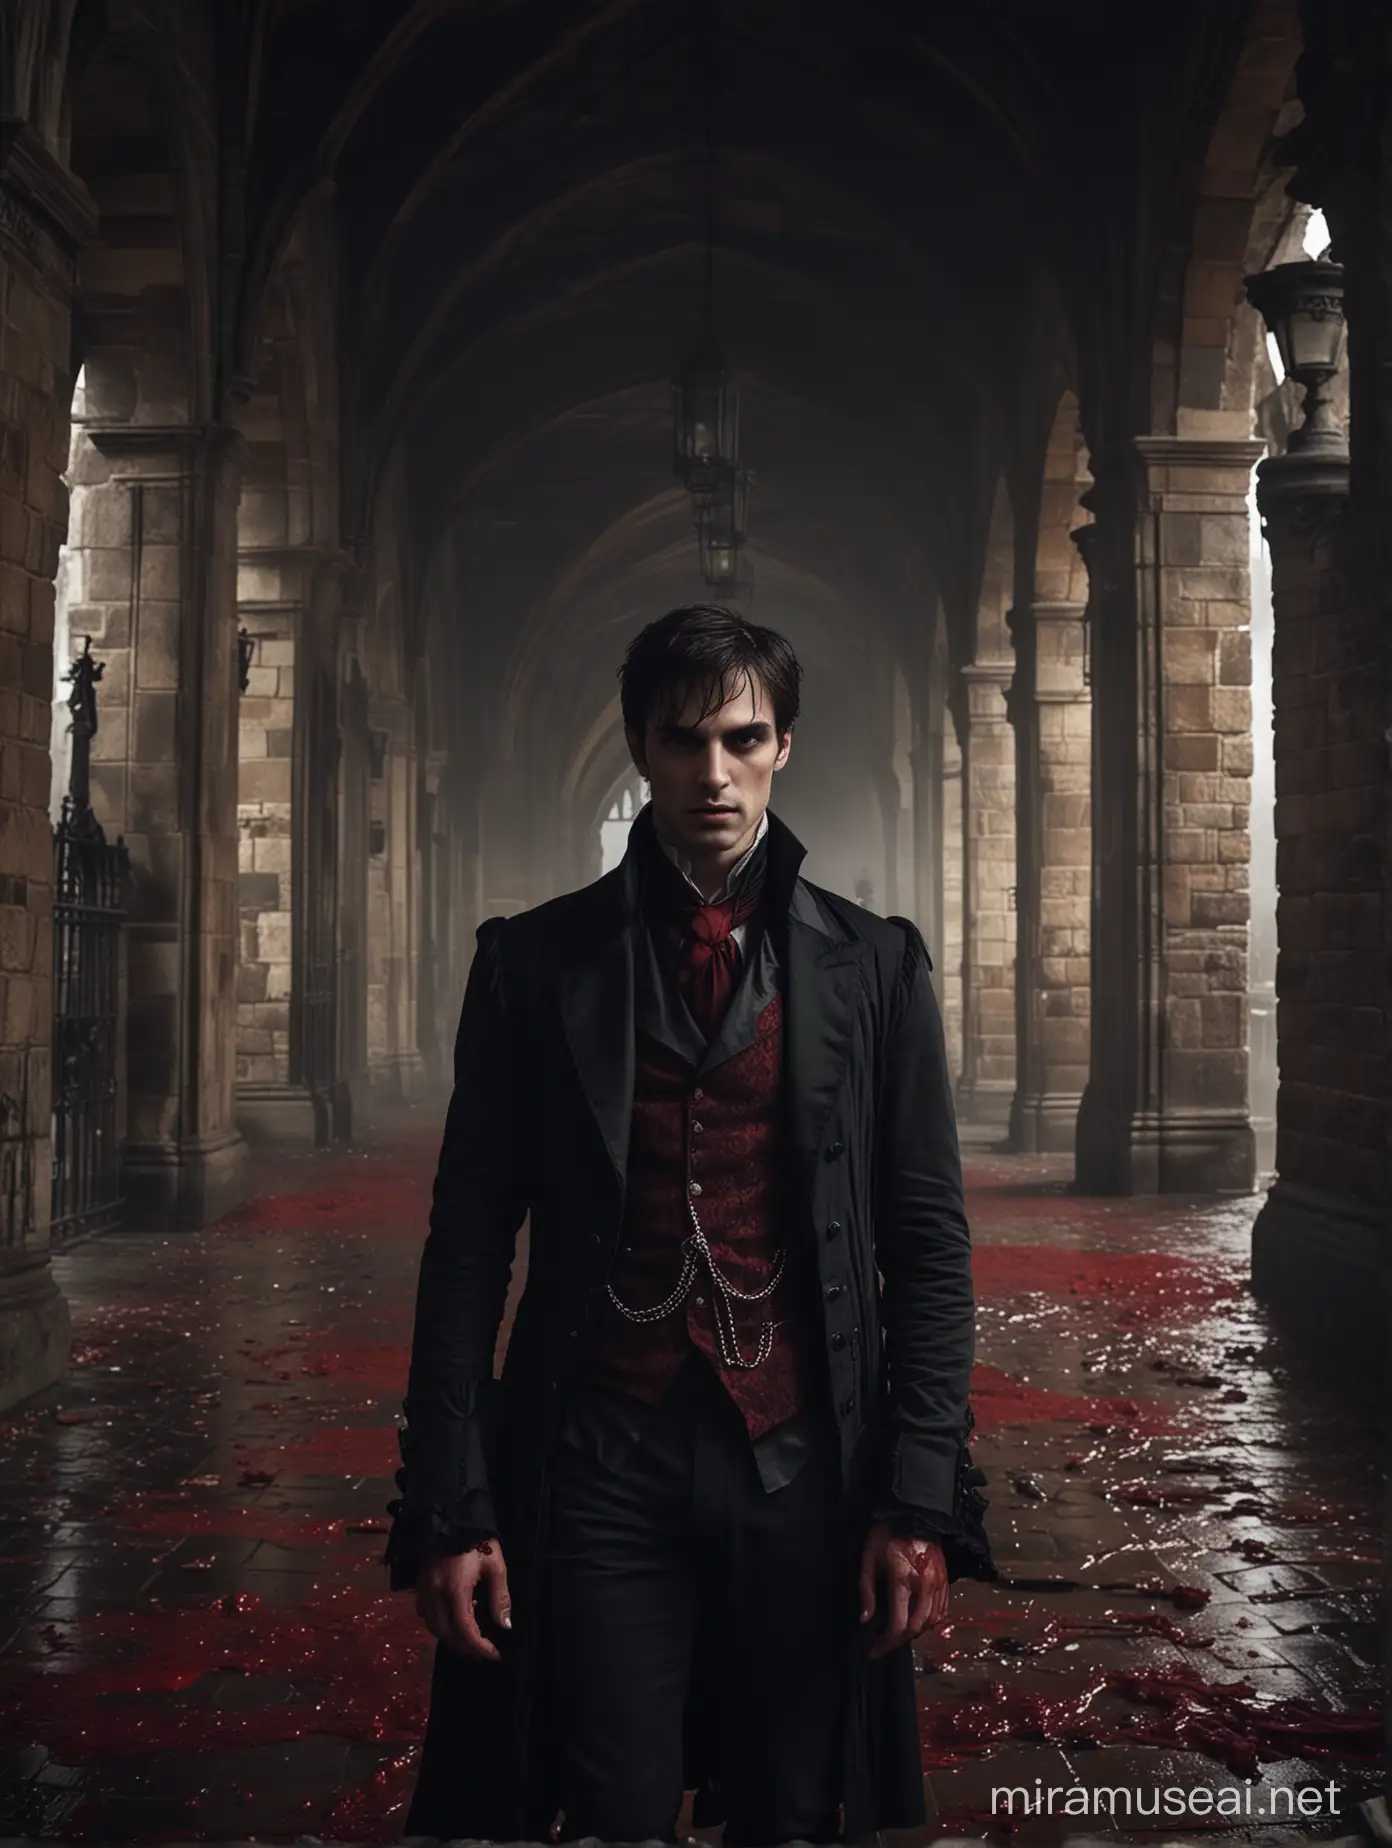 Setting: A dark Victorian castle with Gothic details and a slight mist around.Character: A vampire appearing to be 30 years old, dressed in an elegant Victorian waistcoat and other period clothing, with a seductive and mysterious air.Positioning: The vampire is positioned slightly tilted towards the camera, with a seductive gaze and a faint smile. He is partially shrouded in shadows, suggesting an air of mystery.Blood elements: There are drops of blood running down the vampire's face and scattered on the castle floor, adding a dark and macabre touch.Predominant colors: Predominantly red, with dark tones and deep shadows to create a gloomy and sinister atmosphere.